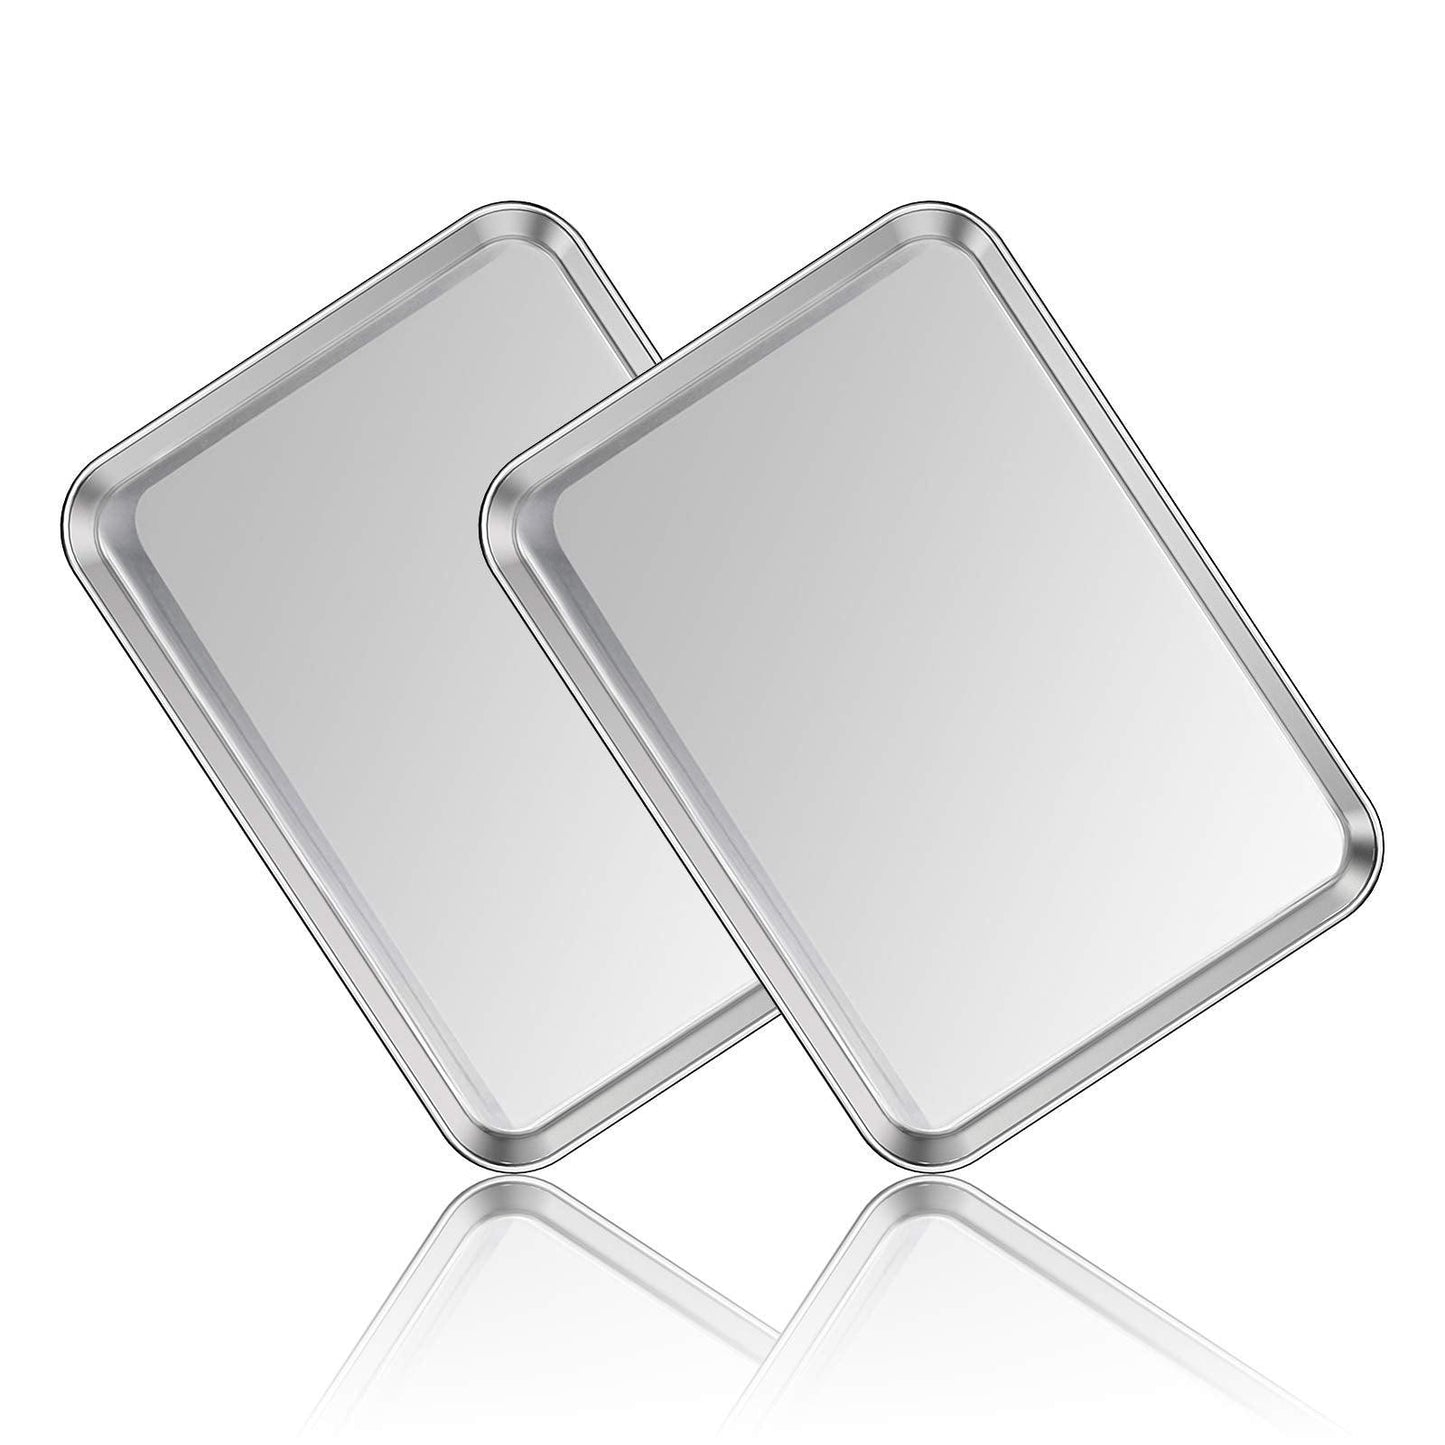 Stainless Steel Baking Sheet Set of 2, Deedro Cookie Sheet Metal Baking Pan Oven Tray, Non Toxic & Heavy Duty, Rust Free & Mirror Finish, Easy Clean & Dishwasher Safe, 16 x 12 x 1 Inch - CookCave